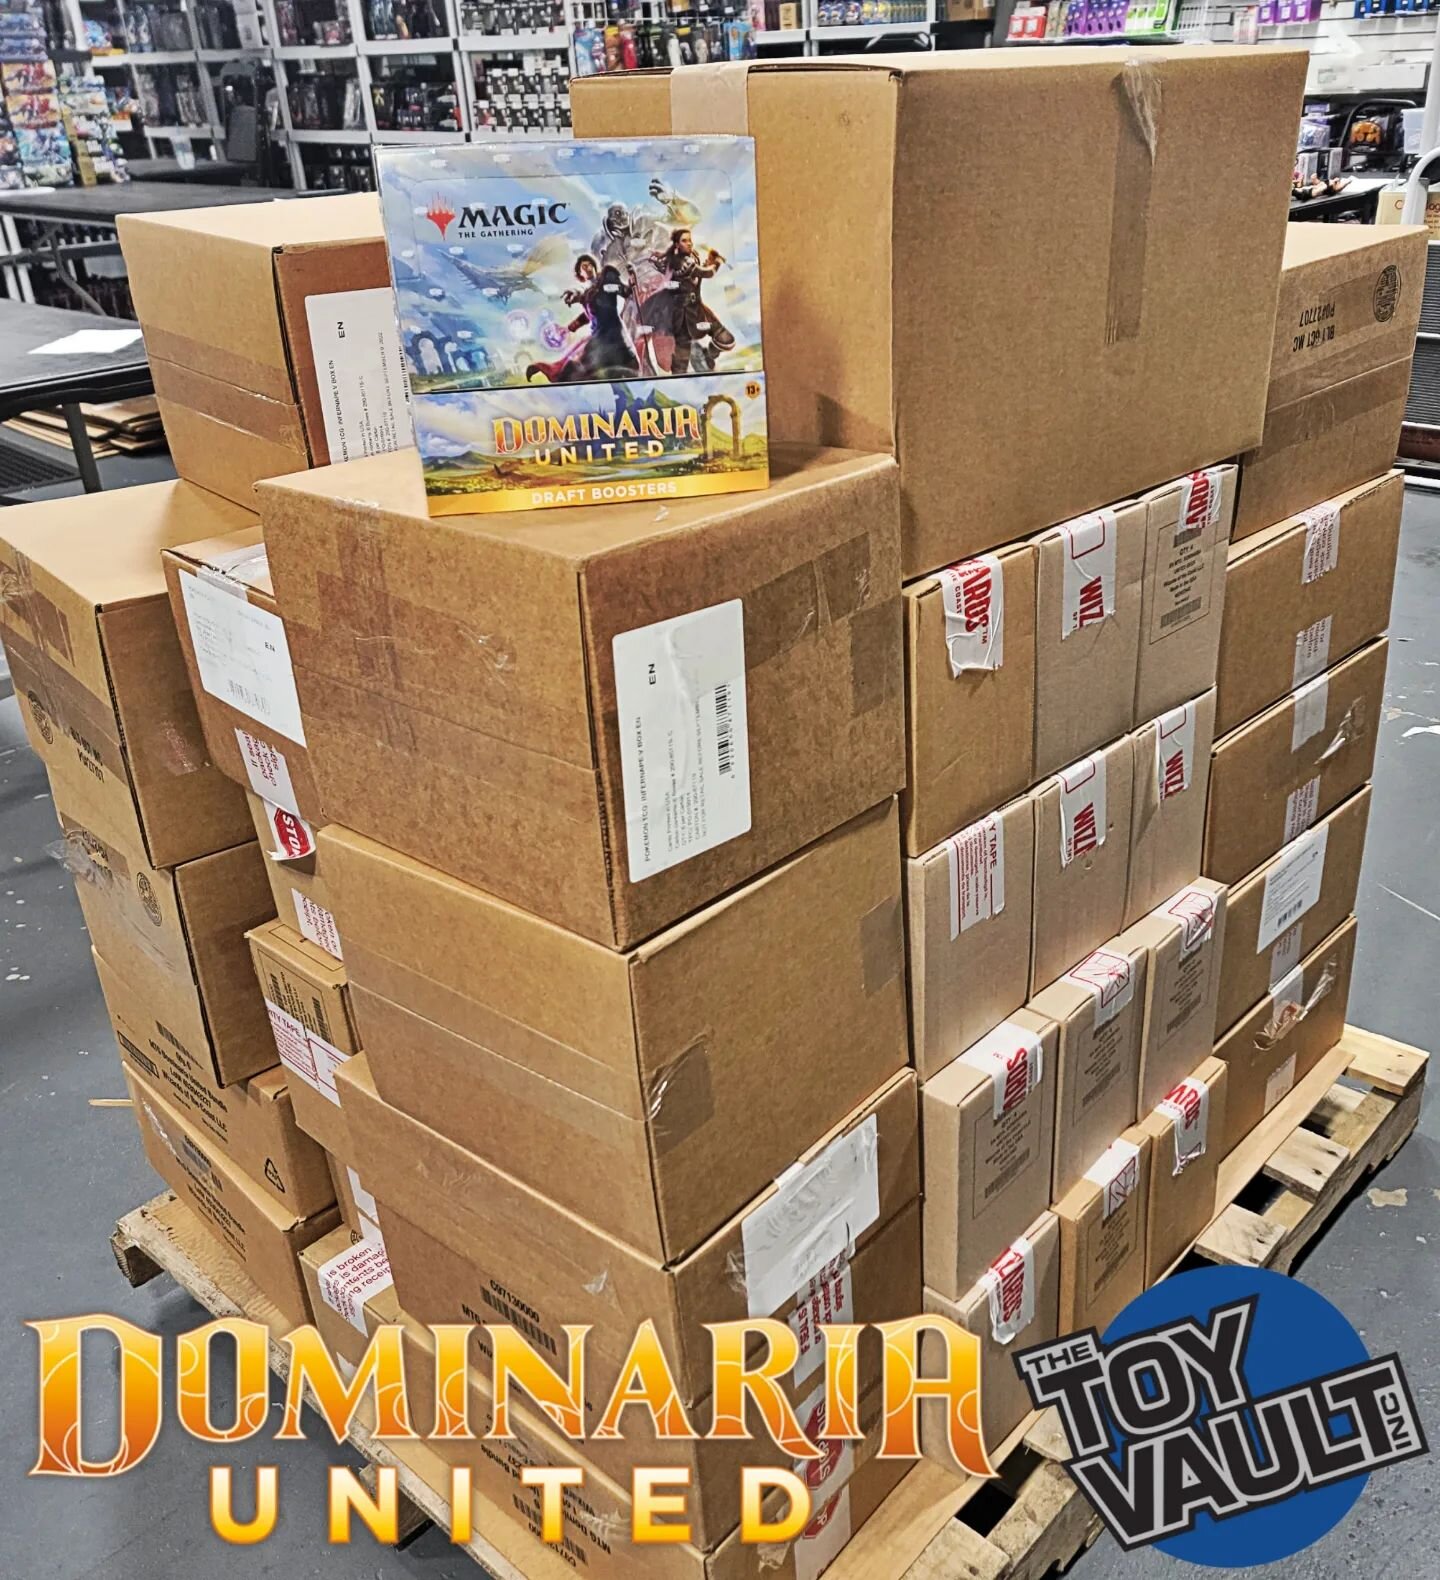 Straight from the distributer to our stores the new Magic The Gathering Dominaria United set! Look at this huge pallets worth! Where else are you going to be able to find such a huge selection of the newest and hottest cards on release date?

#TheToy